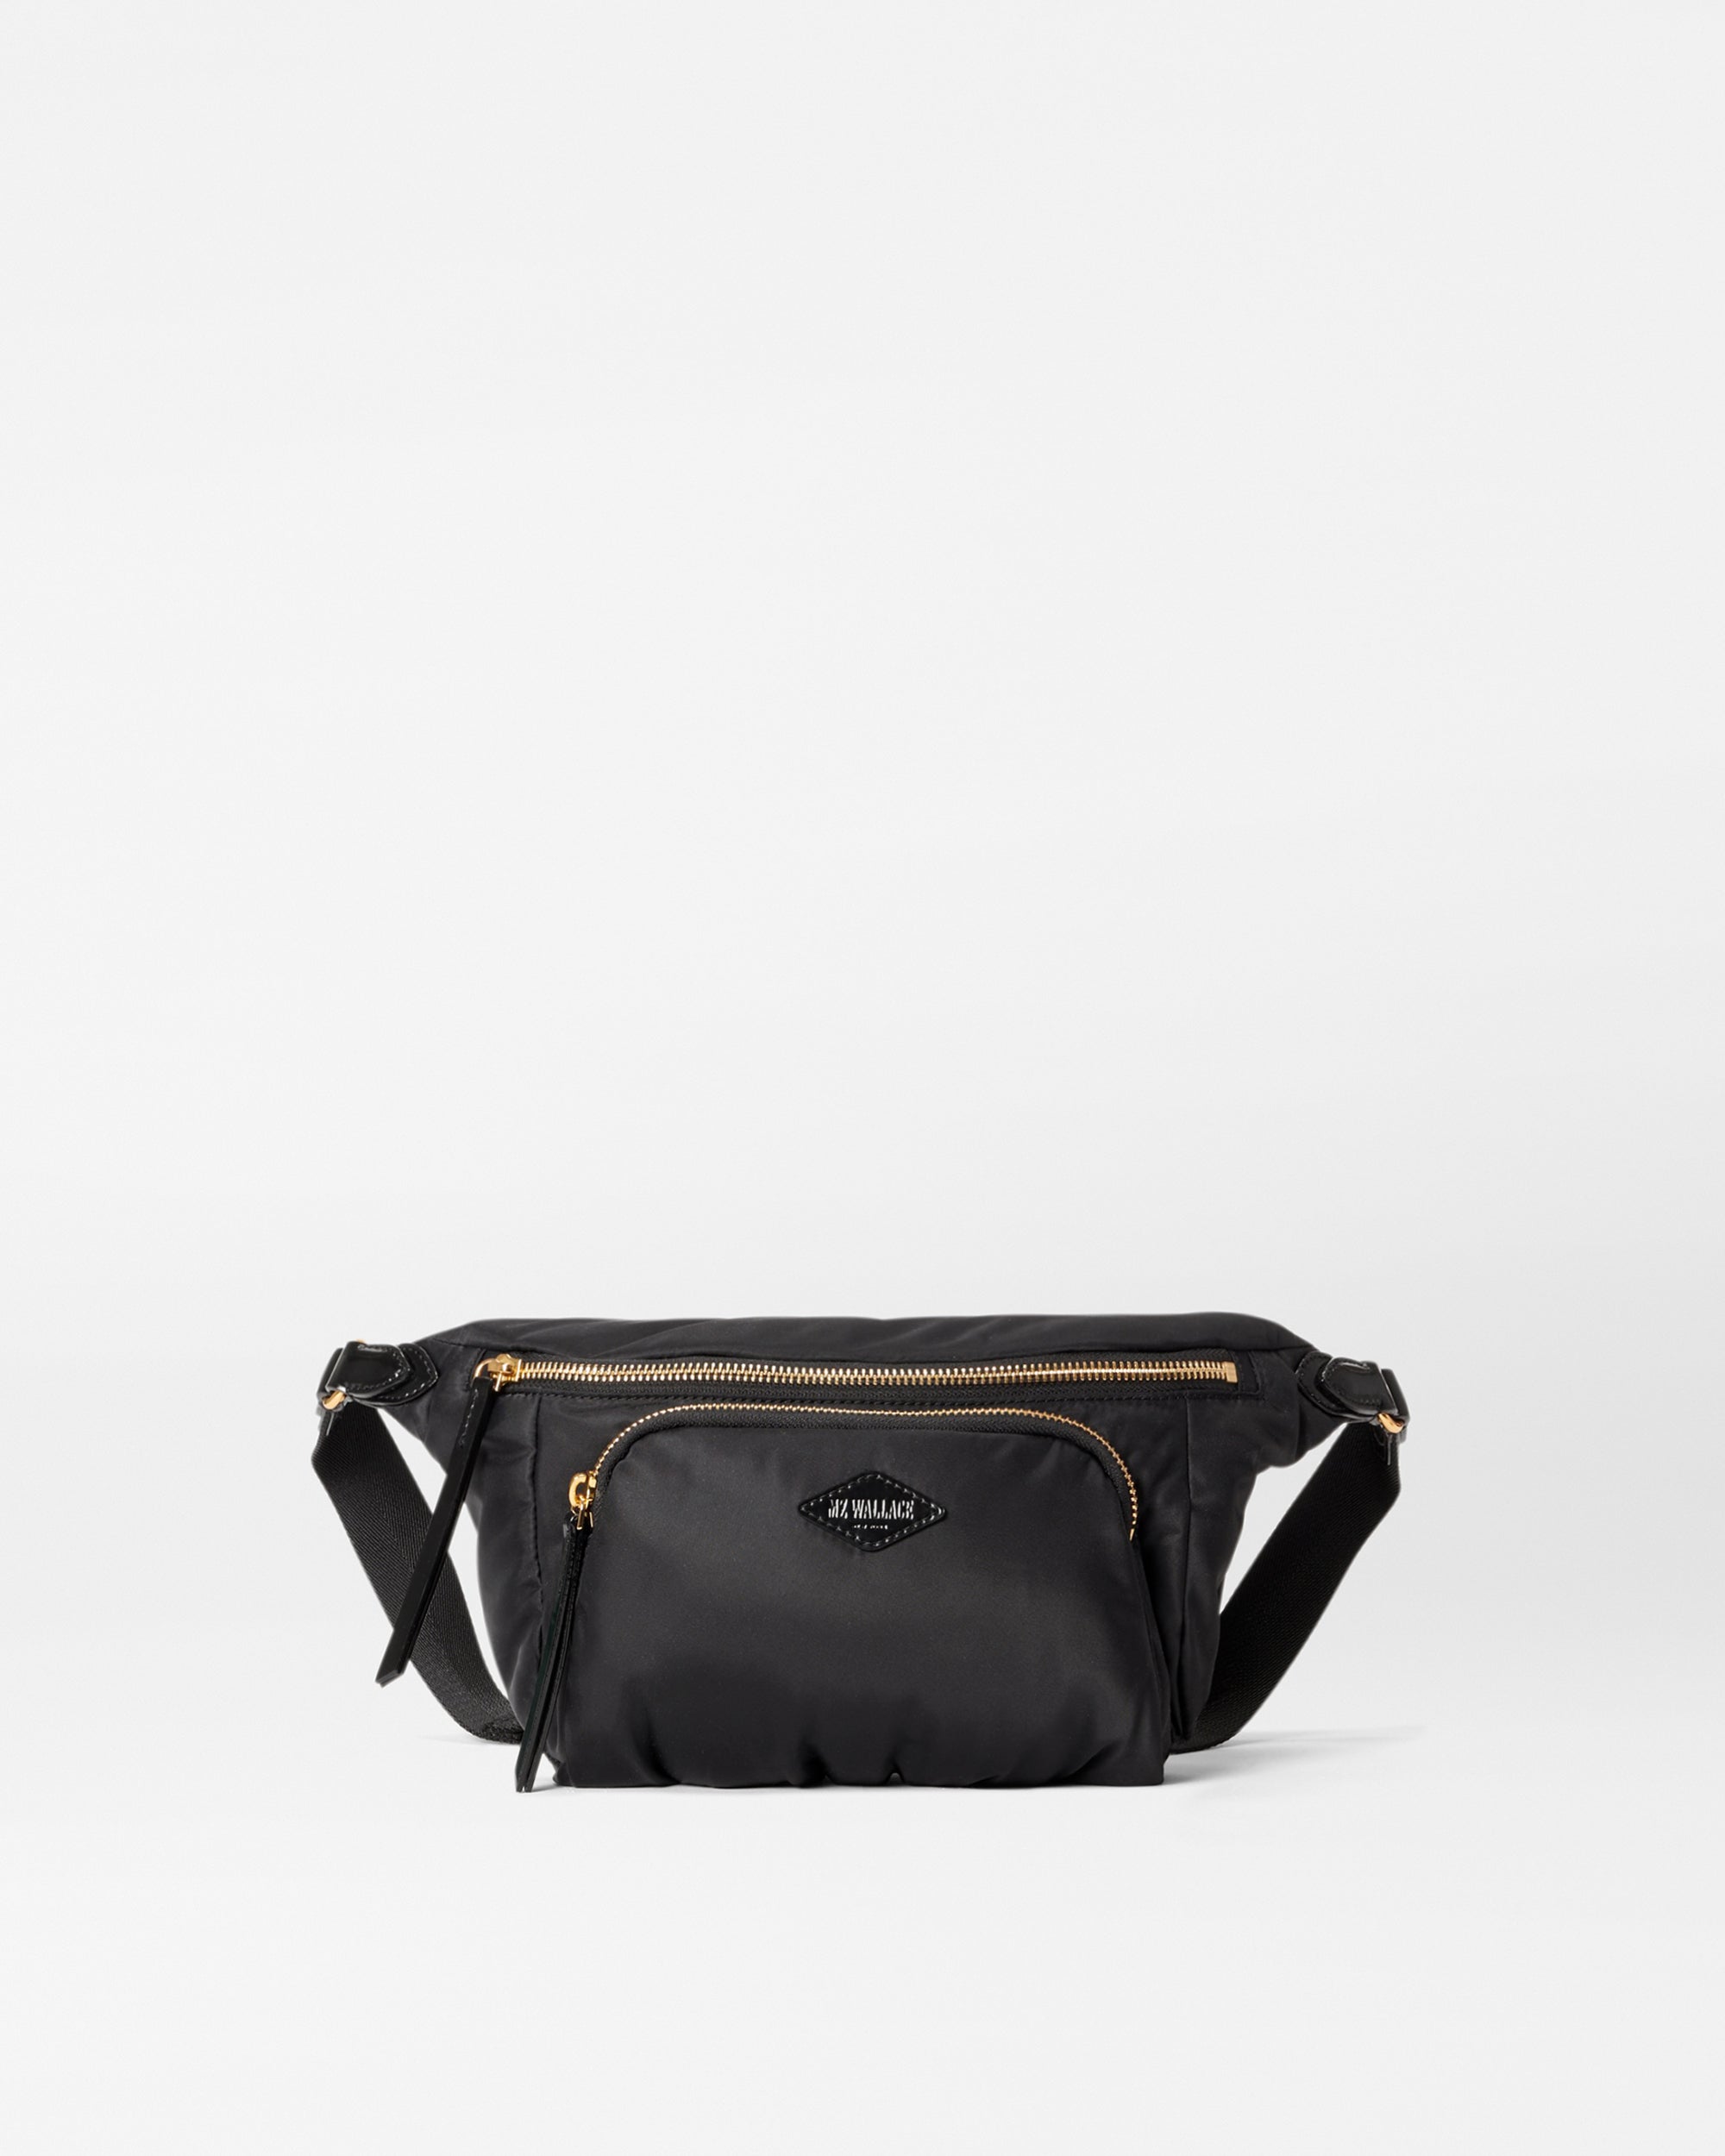 Fanny Pack in Black/Gold | Bandolier Style